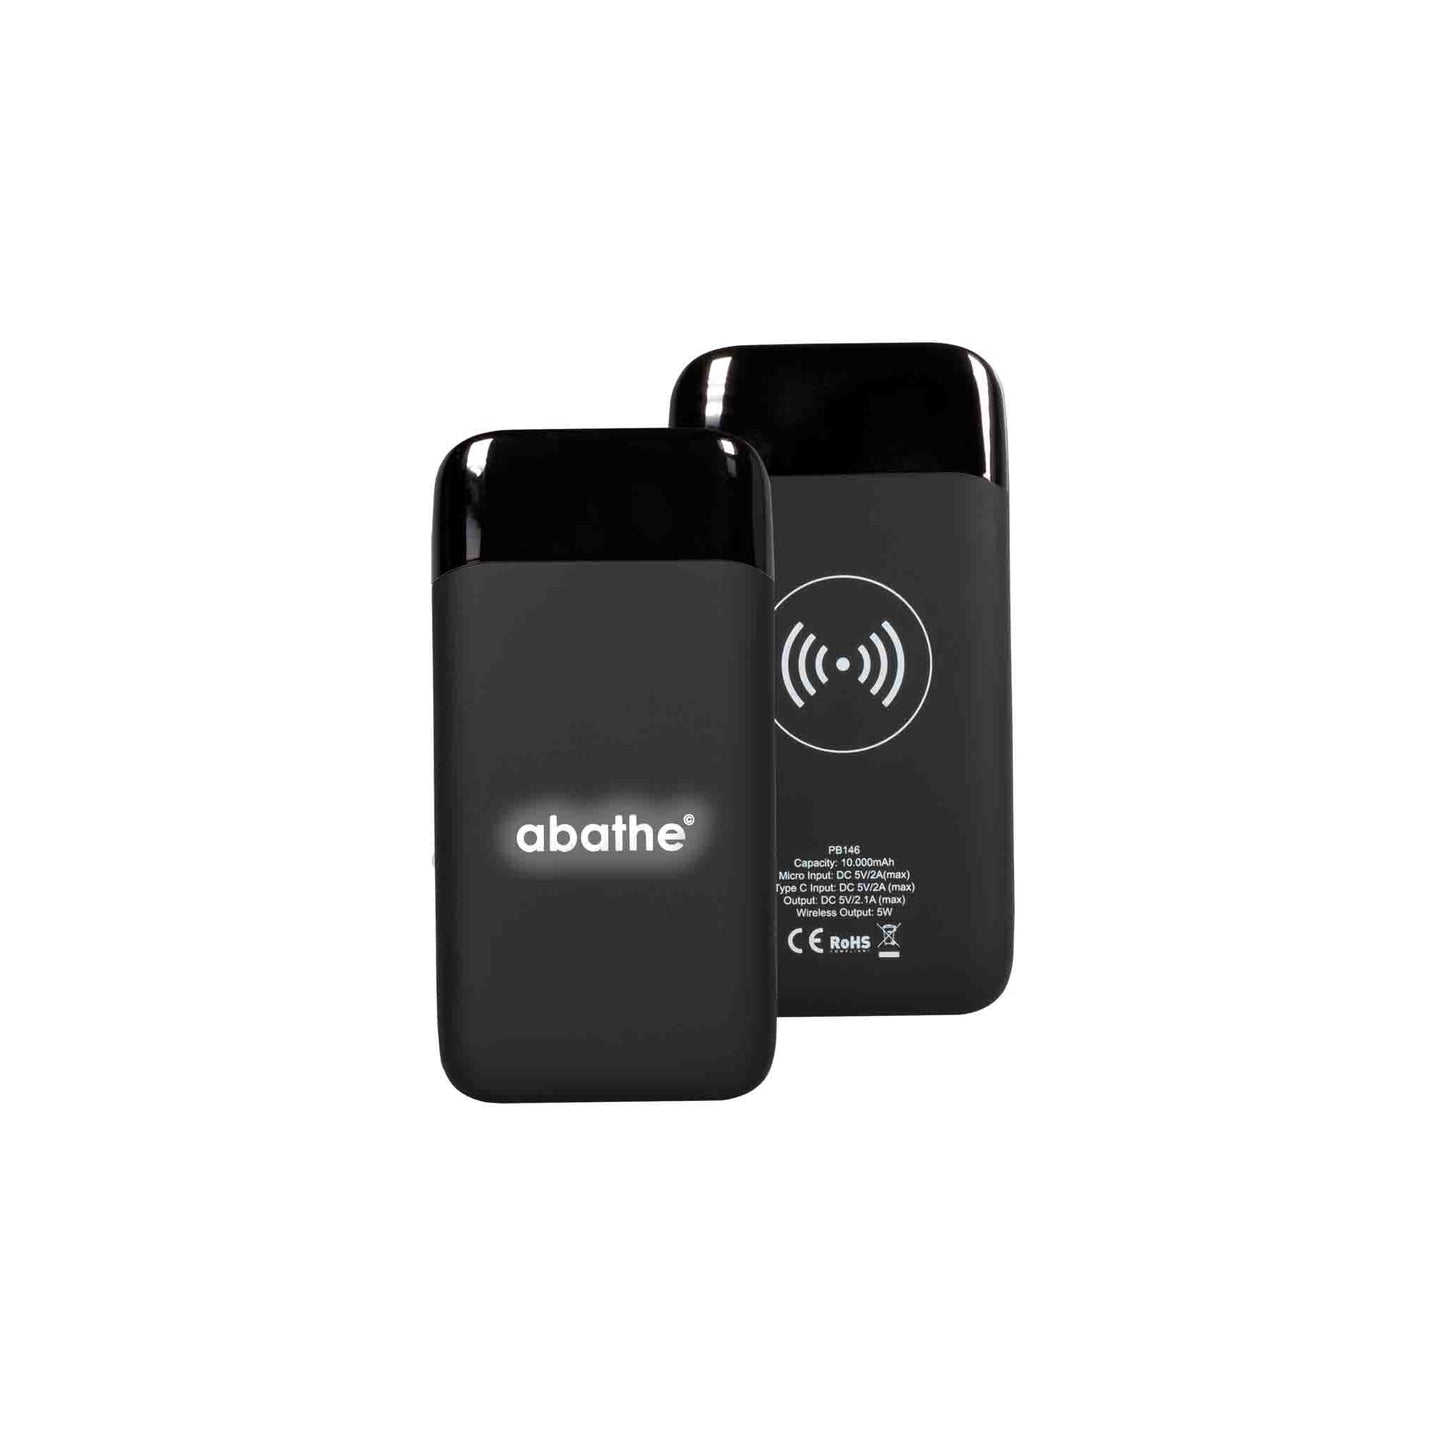 MagPower LED "wireless" power bank